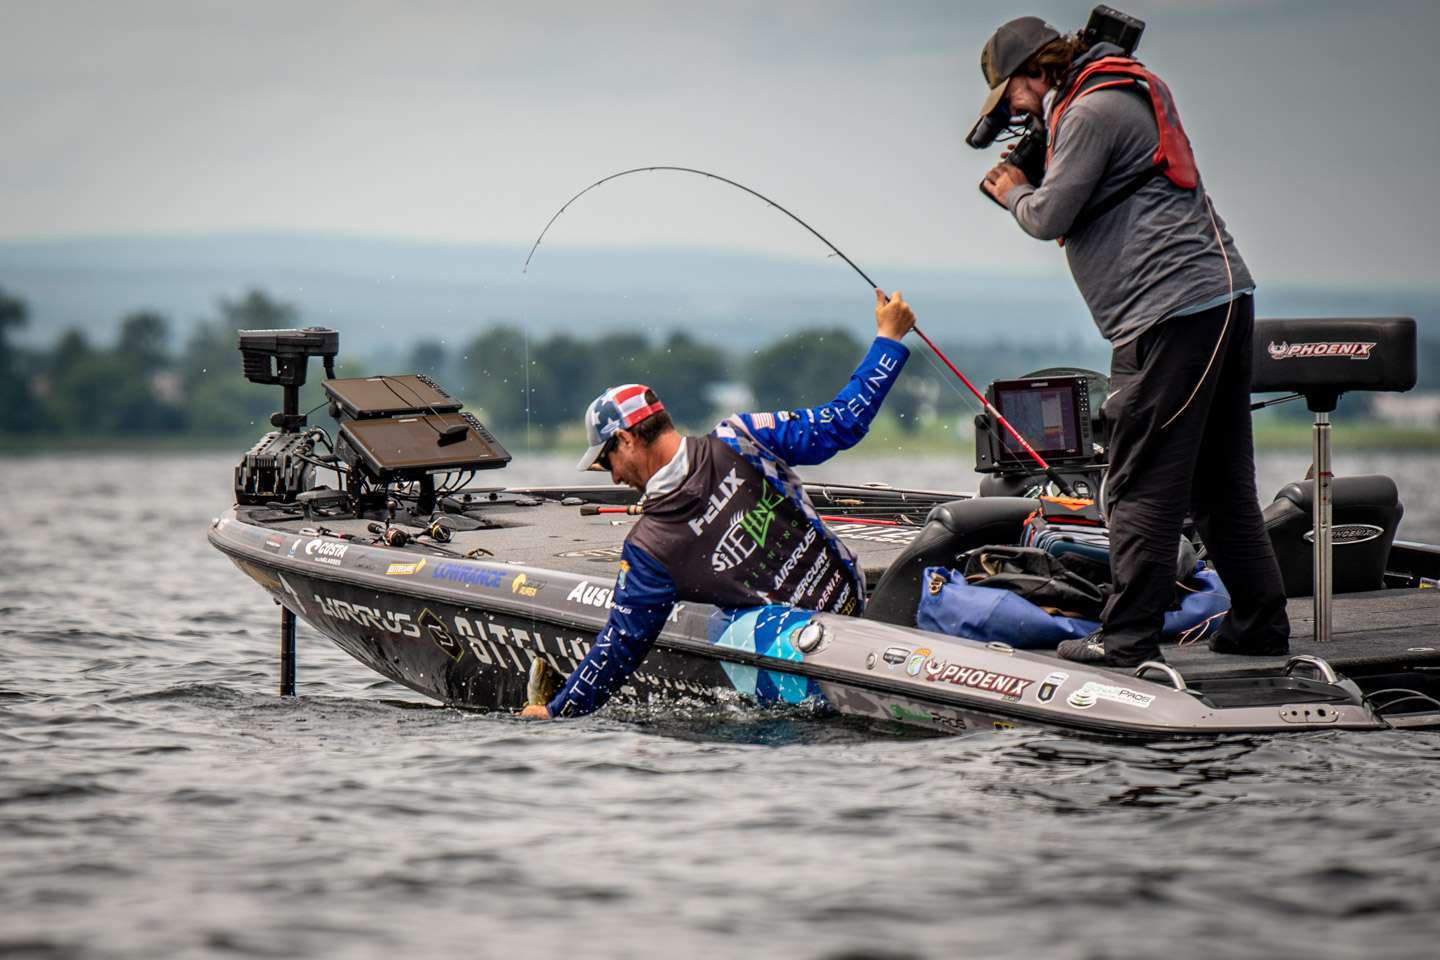 

<h4>Austin Felix (35-1)</h4>
<p><b>Eden Prairie, Minnesota</b><br />
The 2020 Bassmaster Rookie of the Year saw his career continue trending upward in 2021 with a 12th-place finish in the AOY standings. His season featured four Top 10s and a fifth-place finish at Lake Champlain that matched his career best. He finished 39th in his first Classic appearance last year at Ray Roberts.<br />
” class=”wp-image-567963″ width=”1440″ height=”960″/><figcaption>
<h4>Austin Felix (35-1)</h4>
<p><b>Eden Prairie, Minnesota</b><br />
The 2020 Bassmaster Rookie of the Year saw his career continue trending upward in 2021 with a 12th-place finish in the AOY standings. His season featured four Top 10s and a fifth-place finish at Lake Champlain that matched his career best. He finished 39th in his first Classic appearance last year at Ray Roberts.<br />
</figcaption></figure>
<figure class=